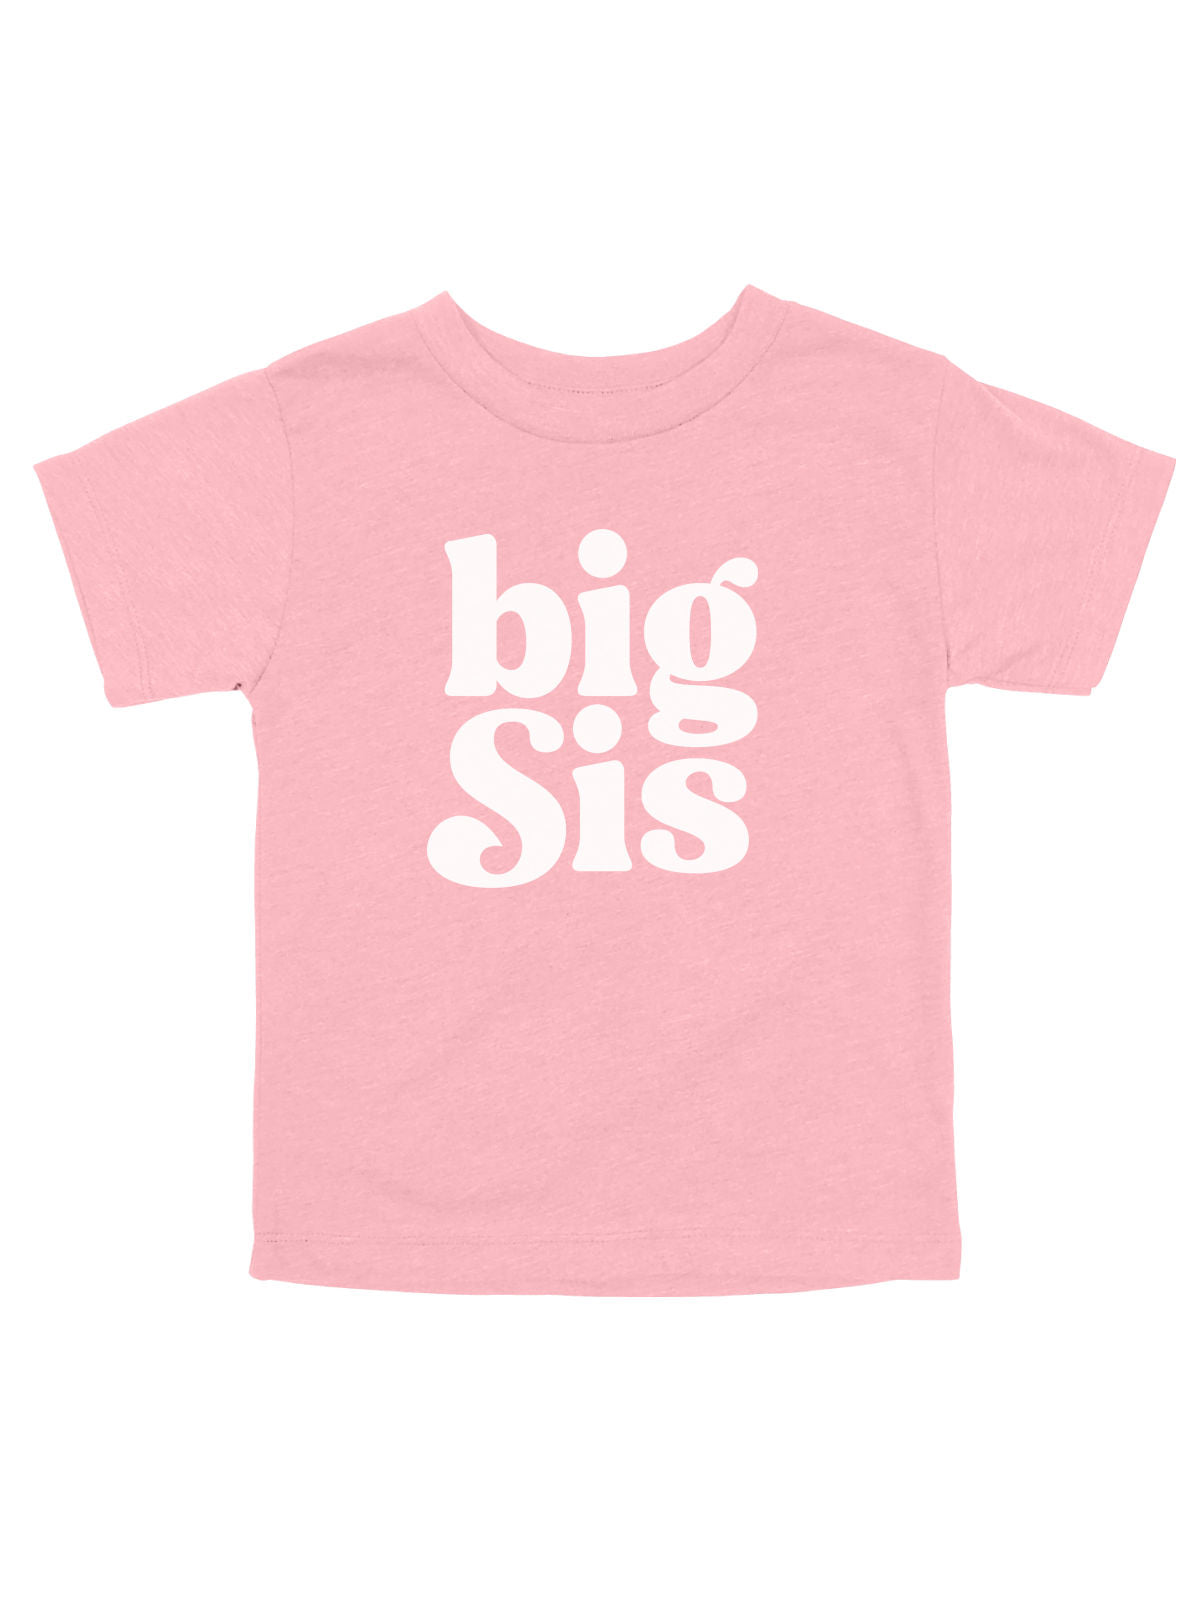 Big Sis Shirt for Girls in Pink